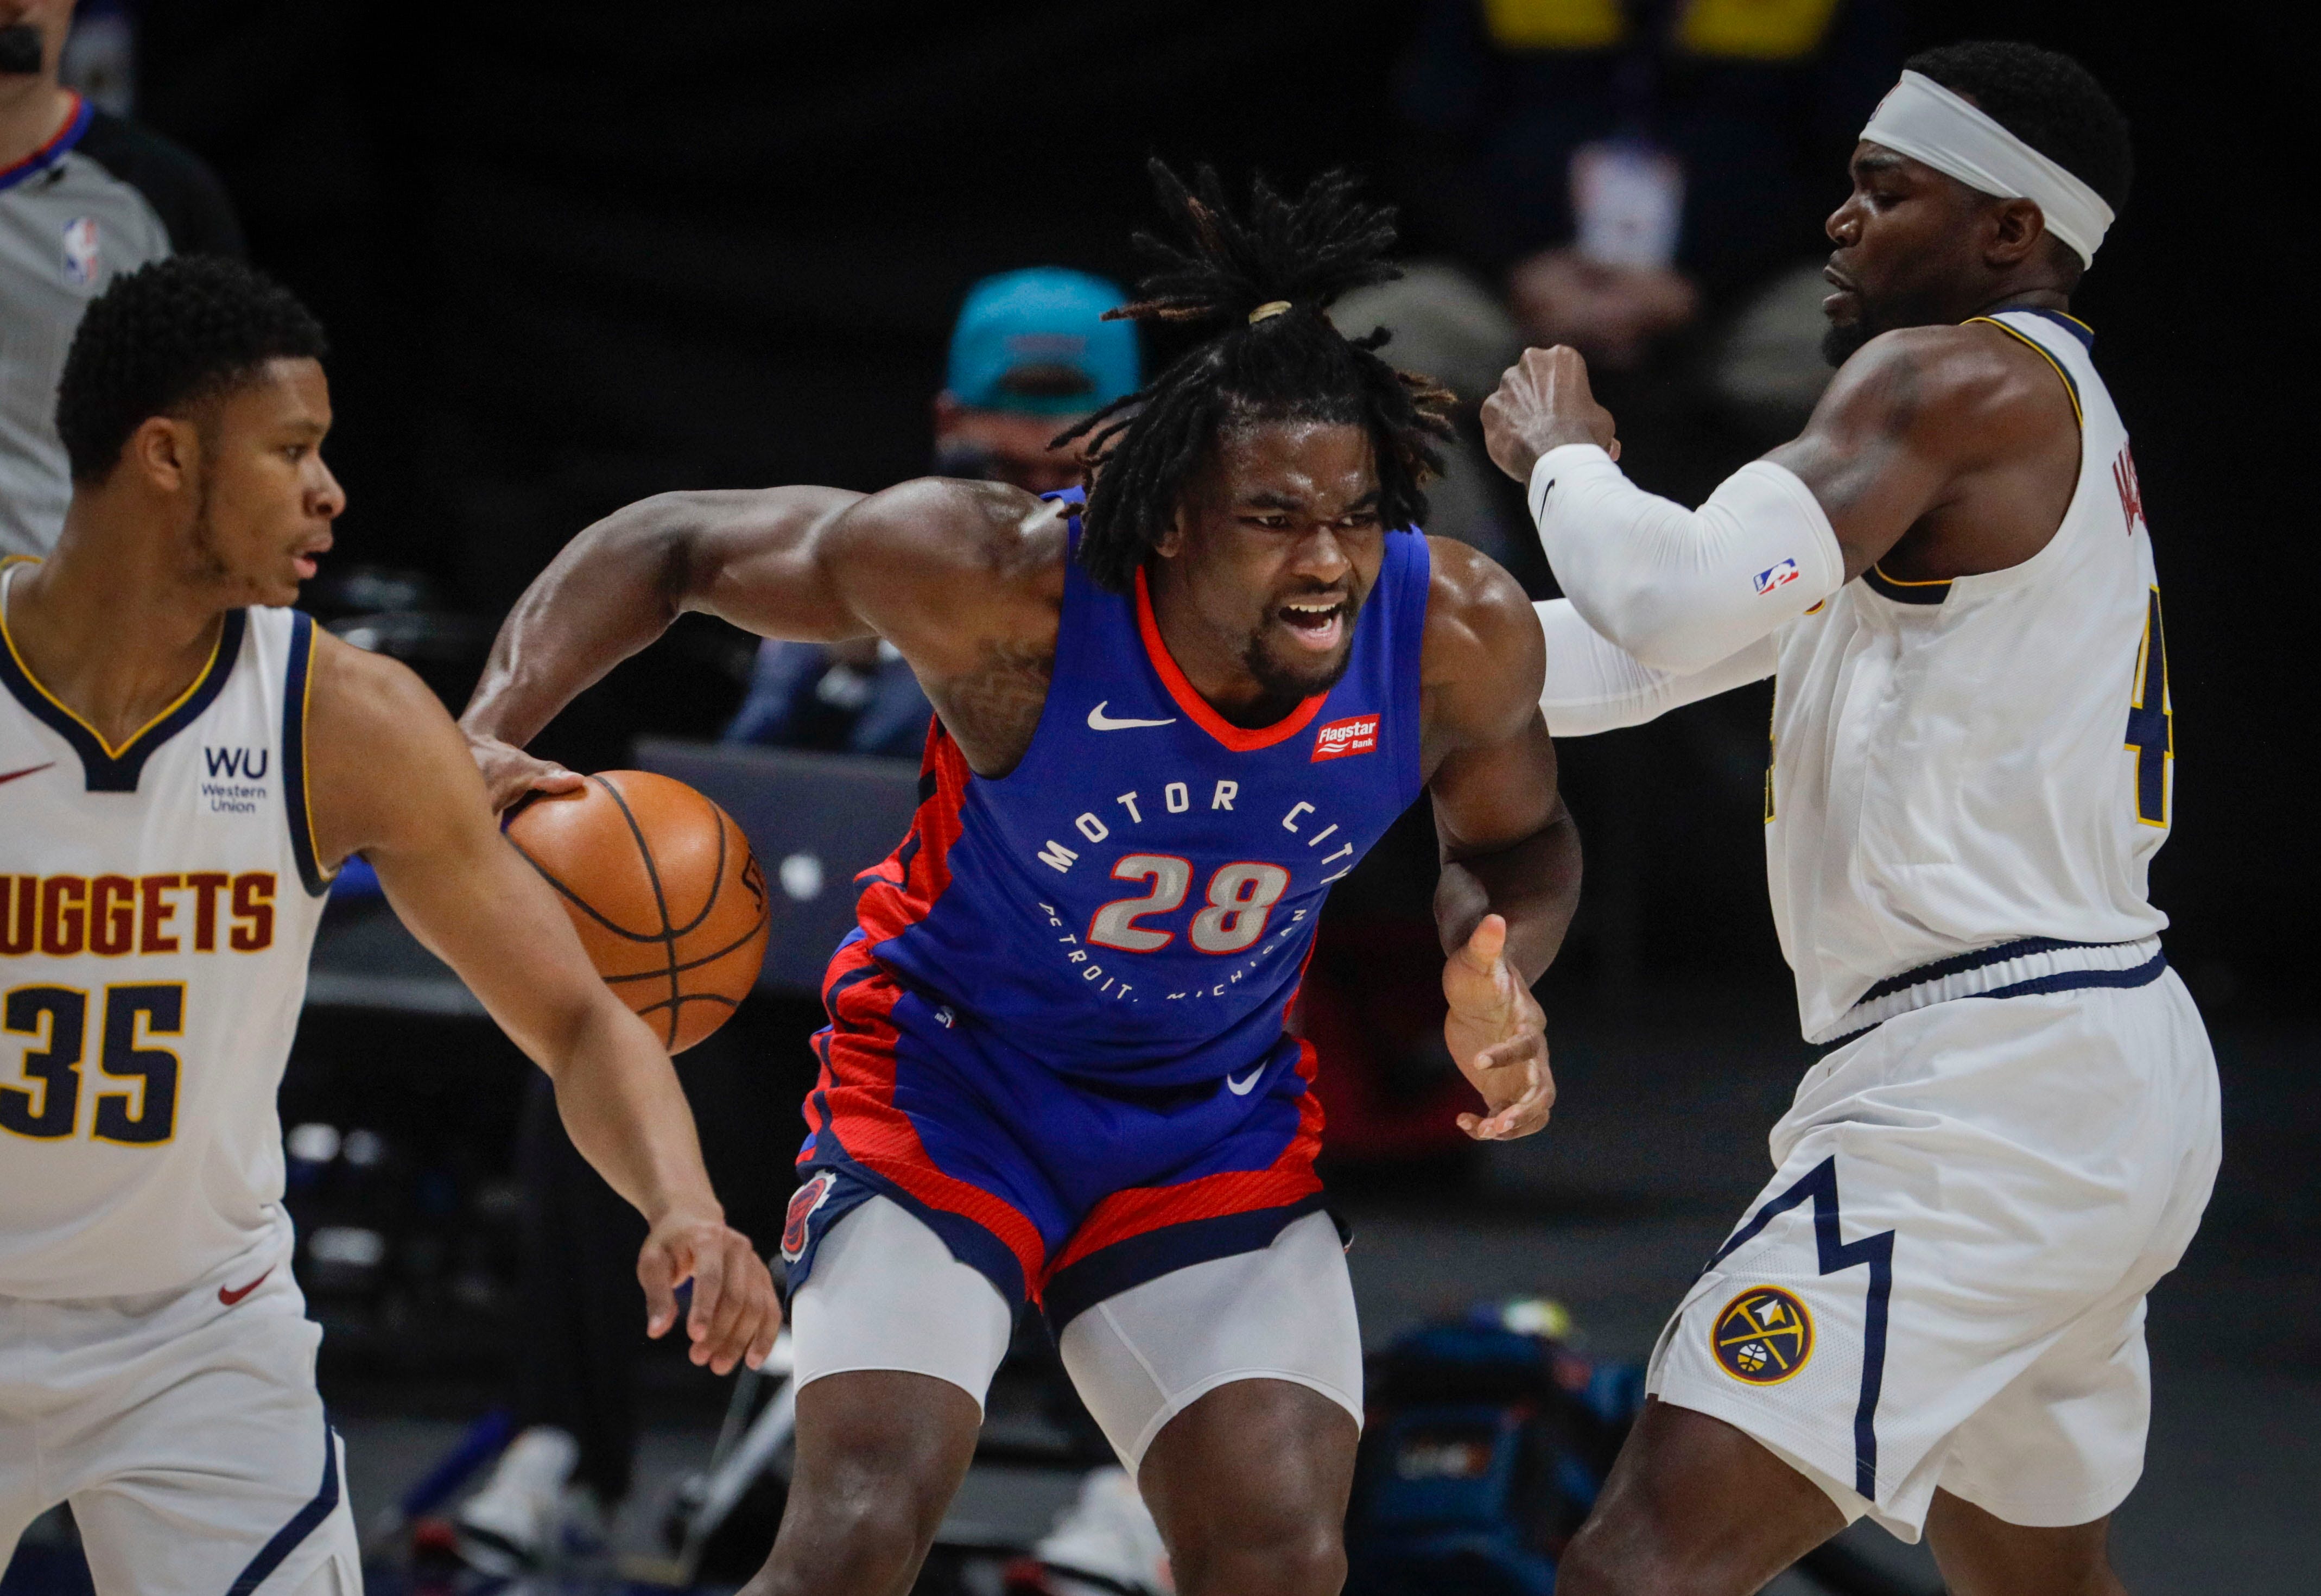 Detroit Pistons center Isaiah Stewart (28) gets position against Denver Nuggets forward Paul Millsap (4) and guard PJ Dozier (35) in the second quarter of an NBA basketball game in Denver, Tuesday, April 6, 2021.